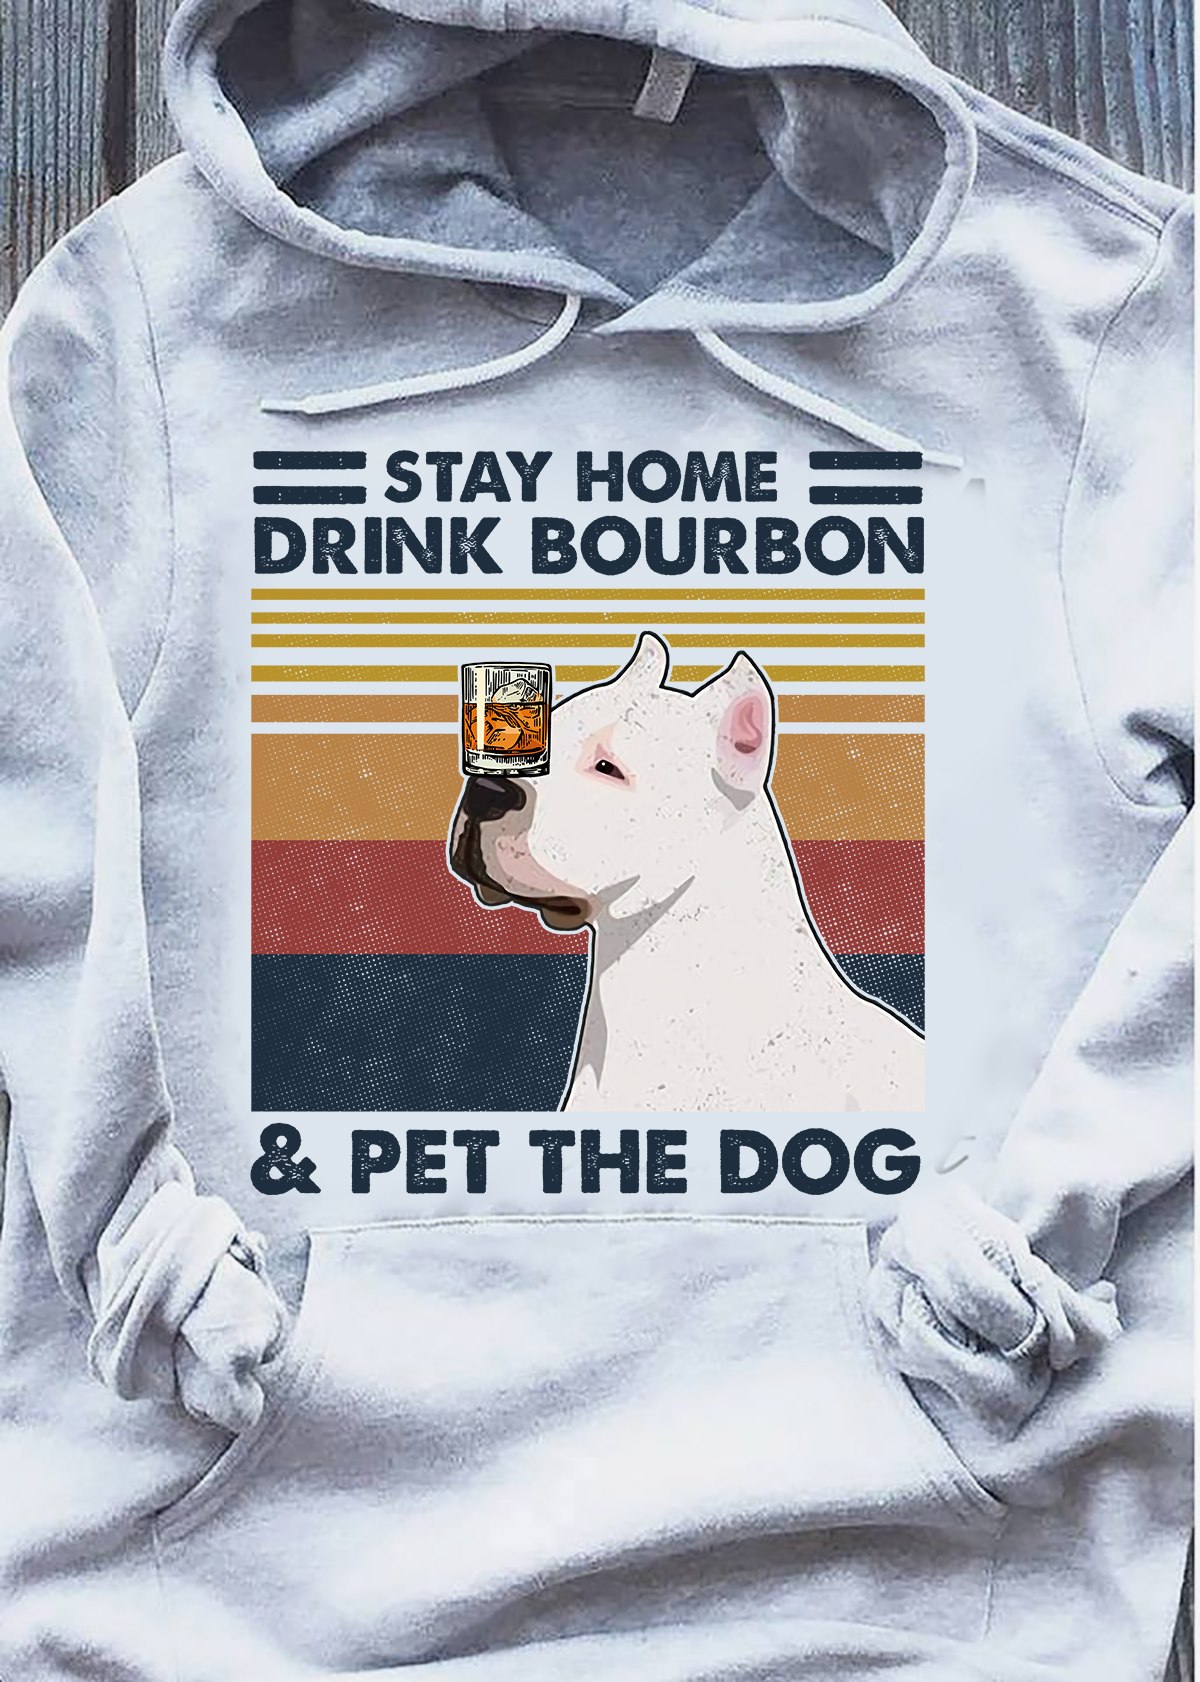 The Bourbon is on the dog's nose